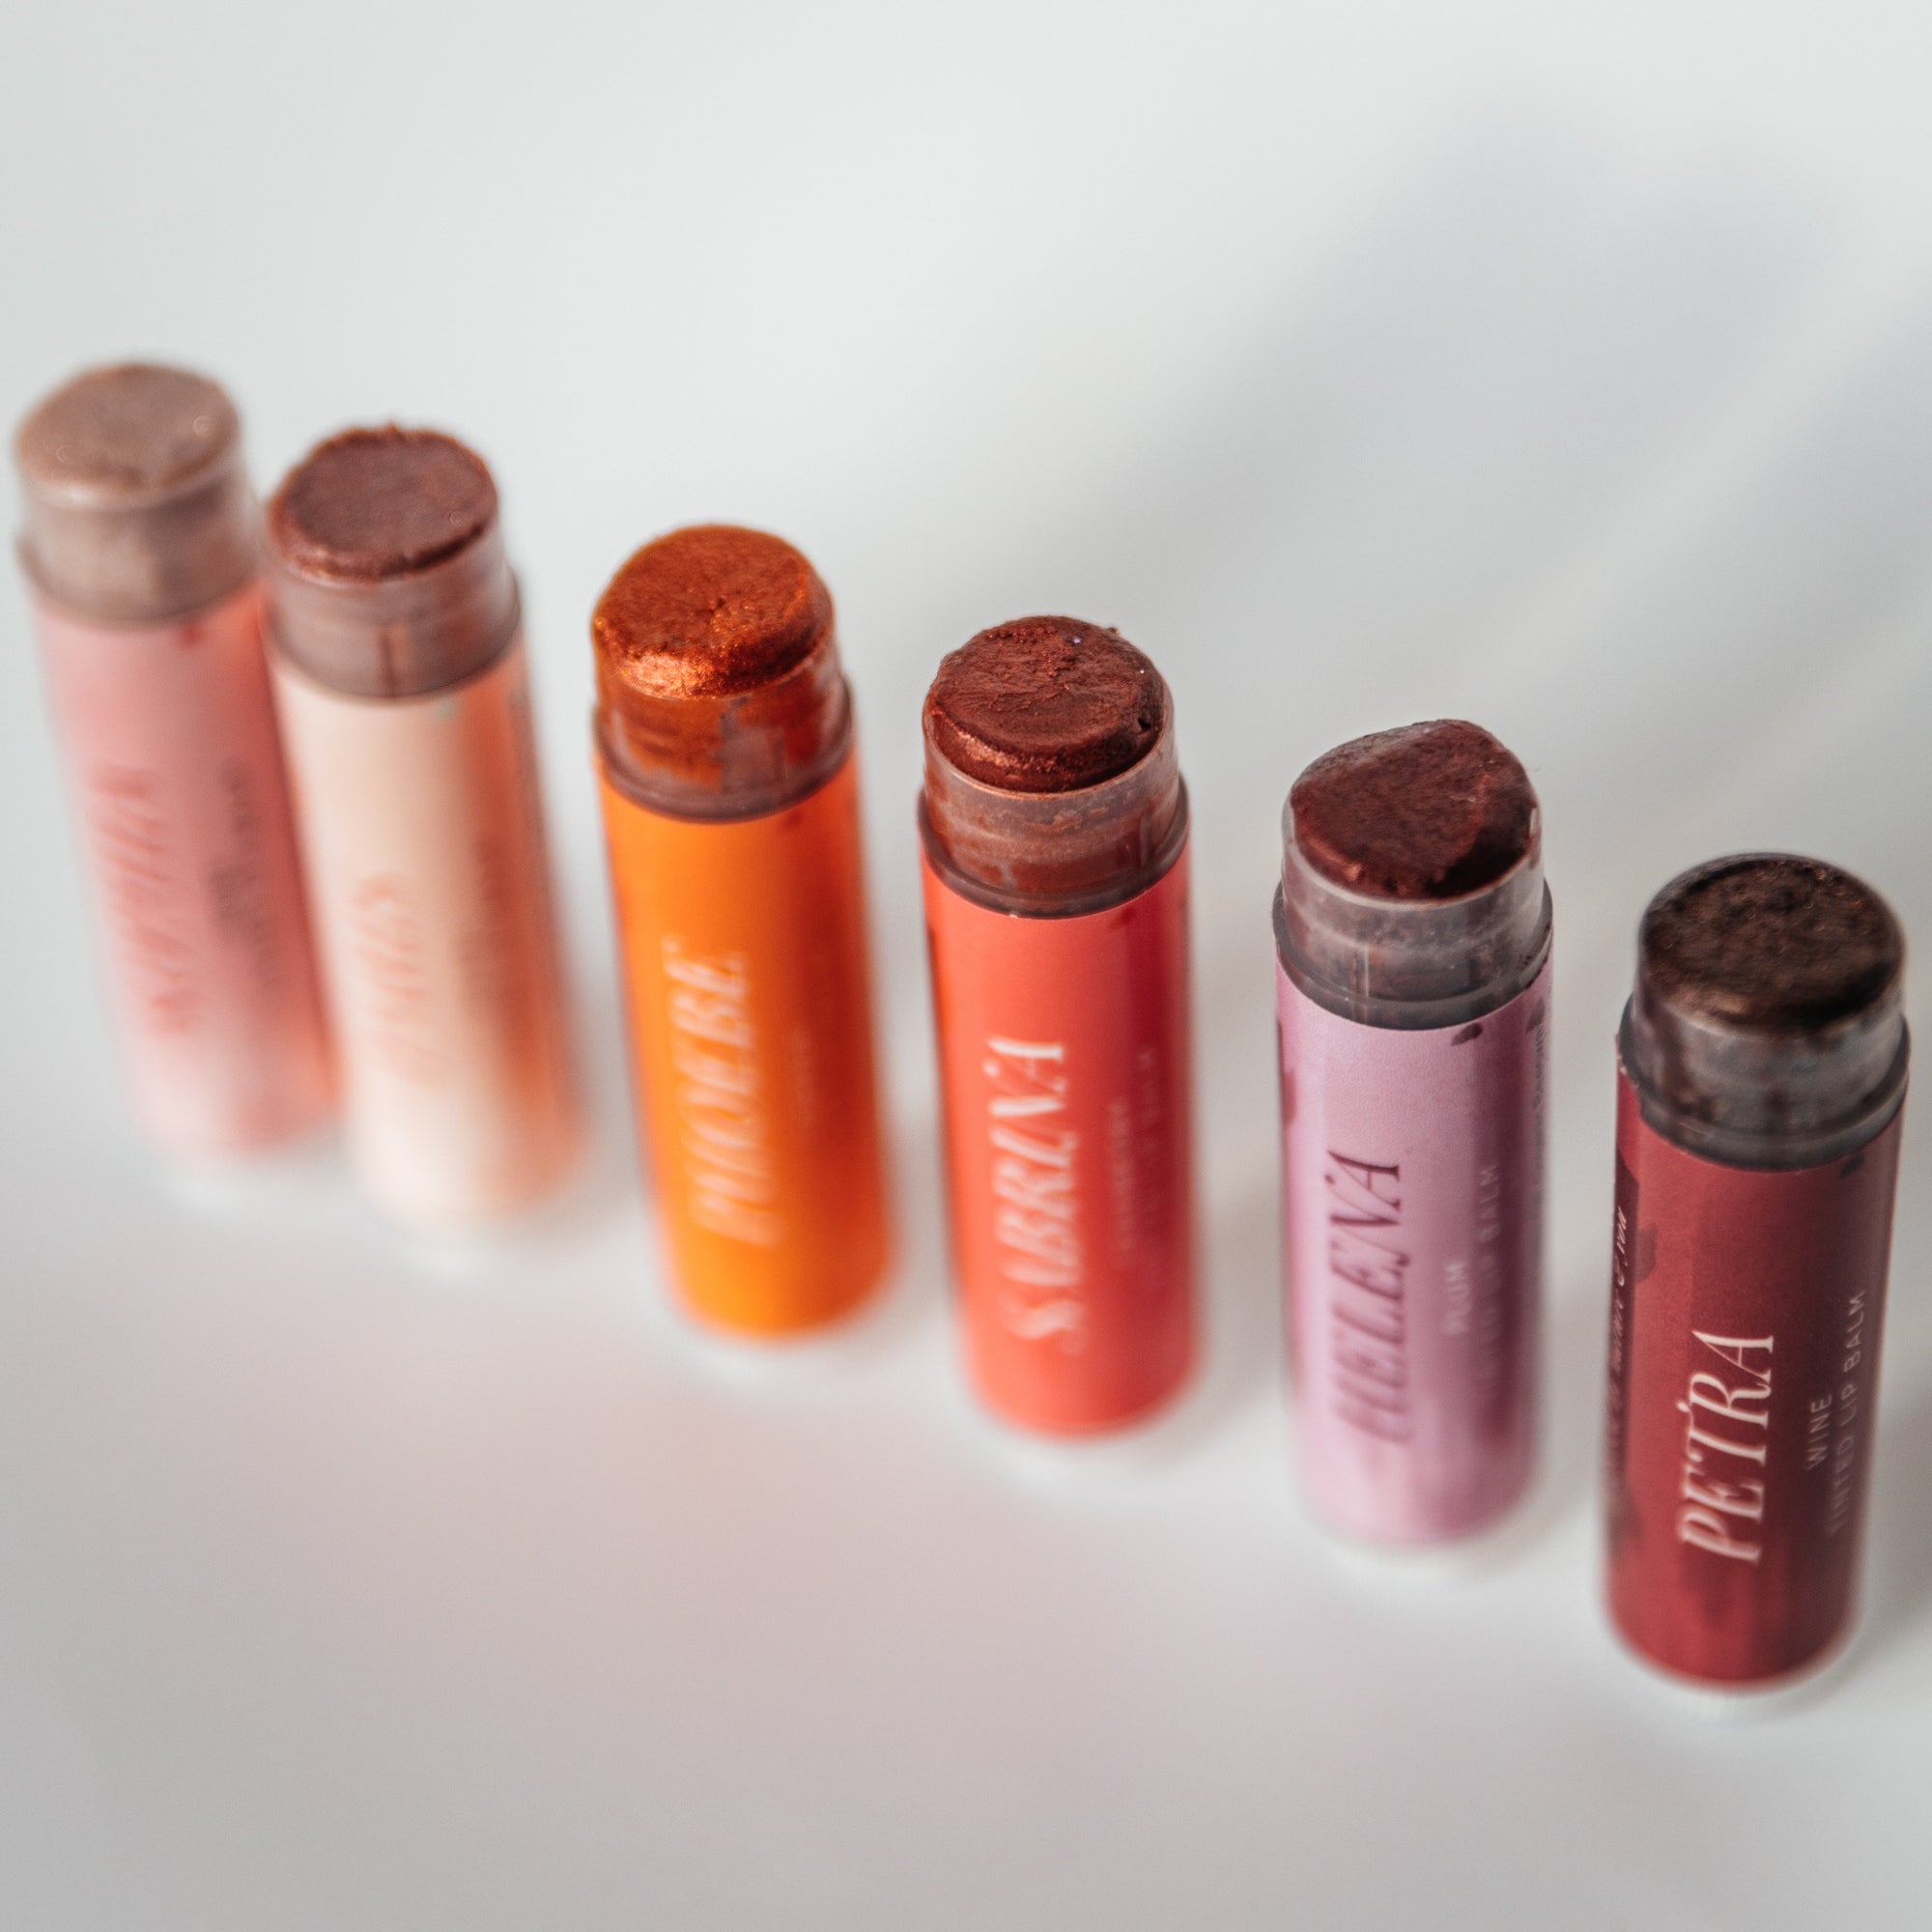 Complete Set of Tinted Lip Balm - Honestly Margo